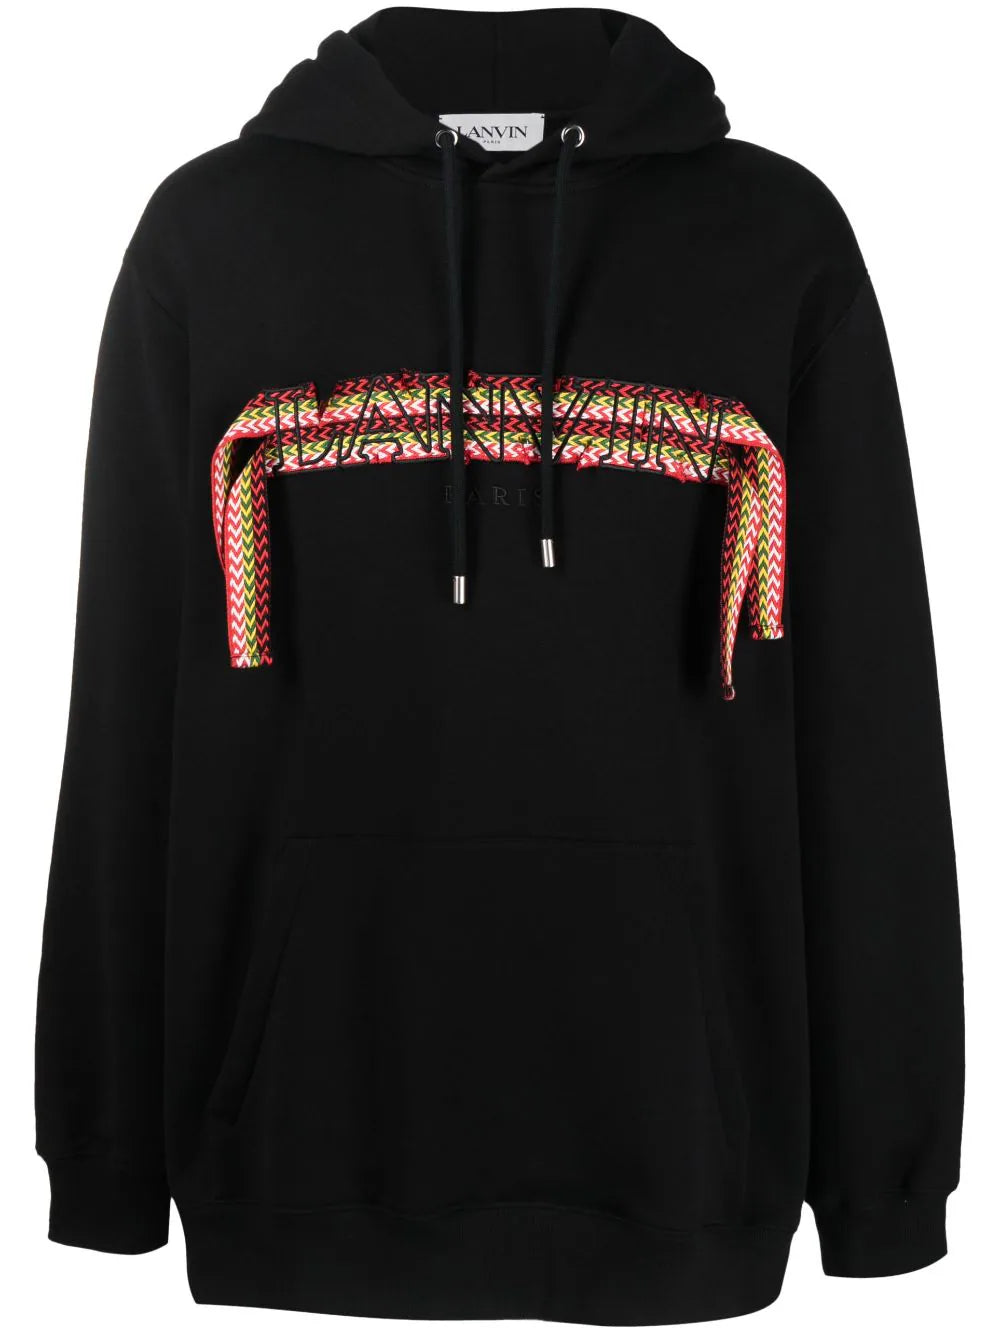 LANVIN - CLASSIC OVERSIZED CURBLACE HOODIE - SHEET-1